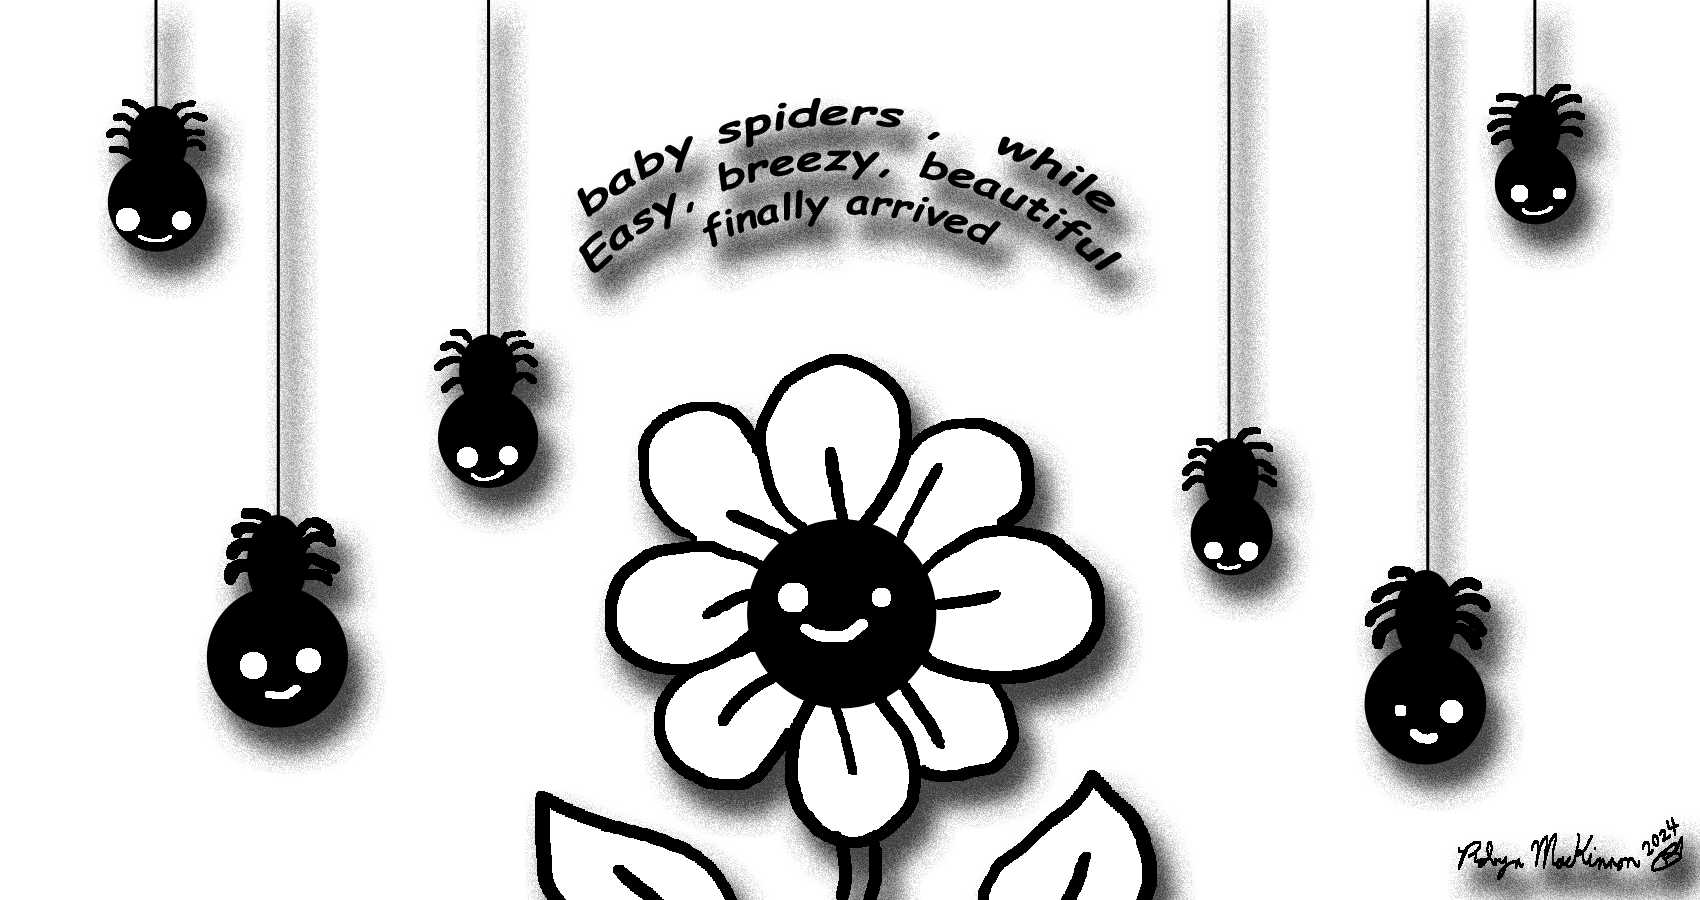 Baby Spiders, a haiku by Robyn MacKinnon at Spillwords.com